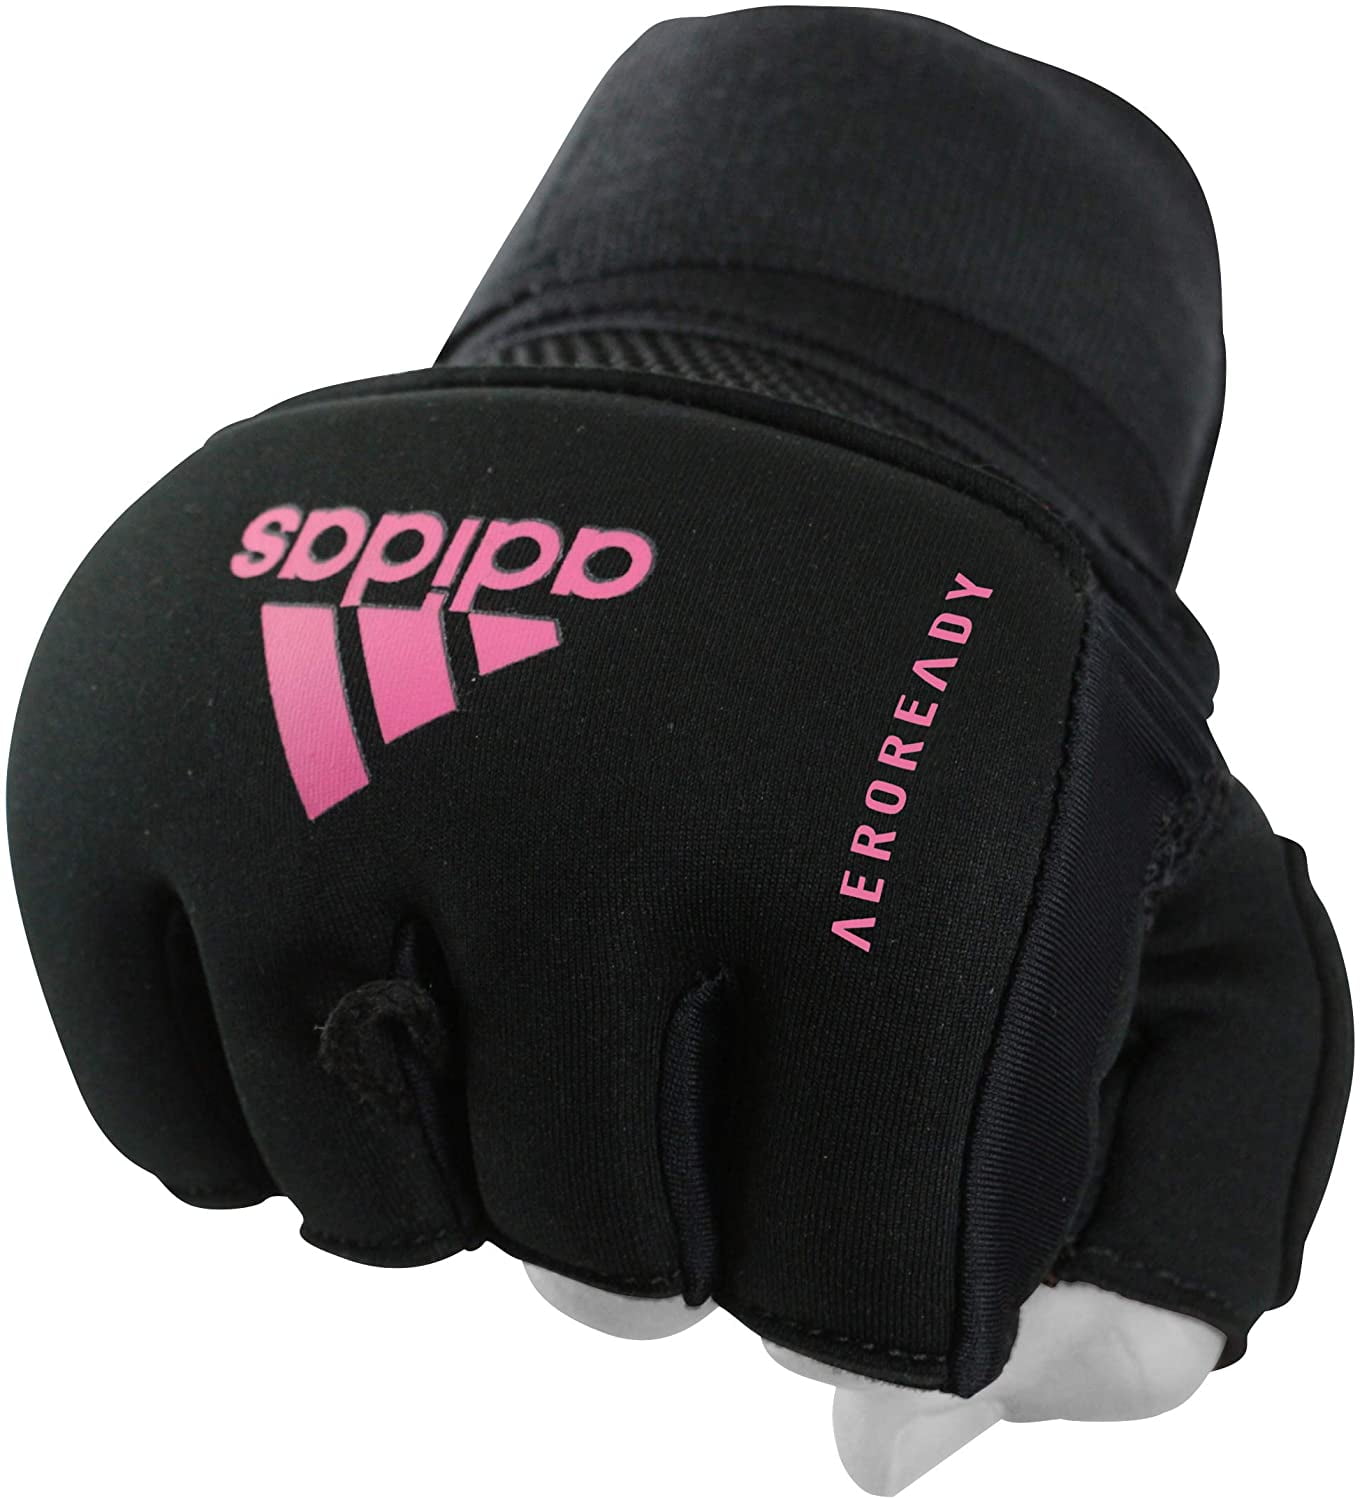 M-L-XL Boxing Inner Hand Wraps Gloves Fist Padded Bandages MMA Thai Pink Size 